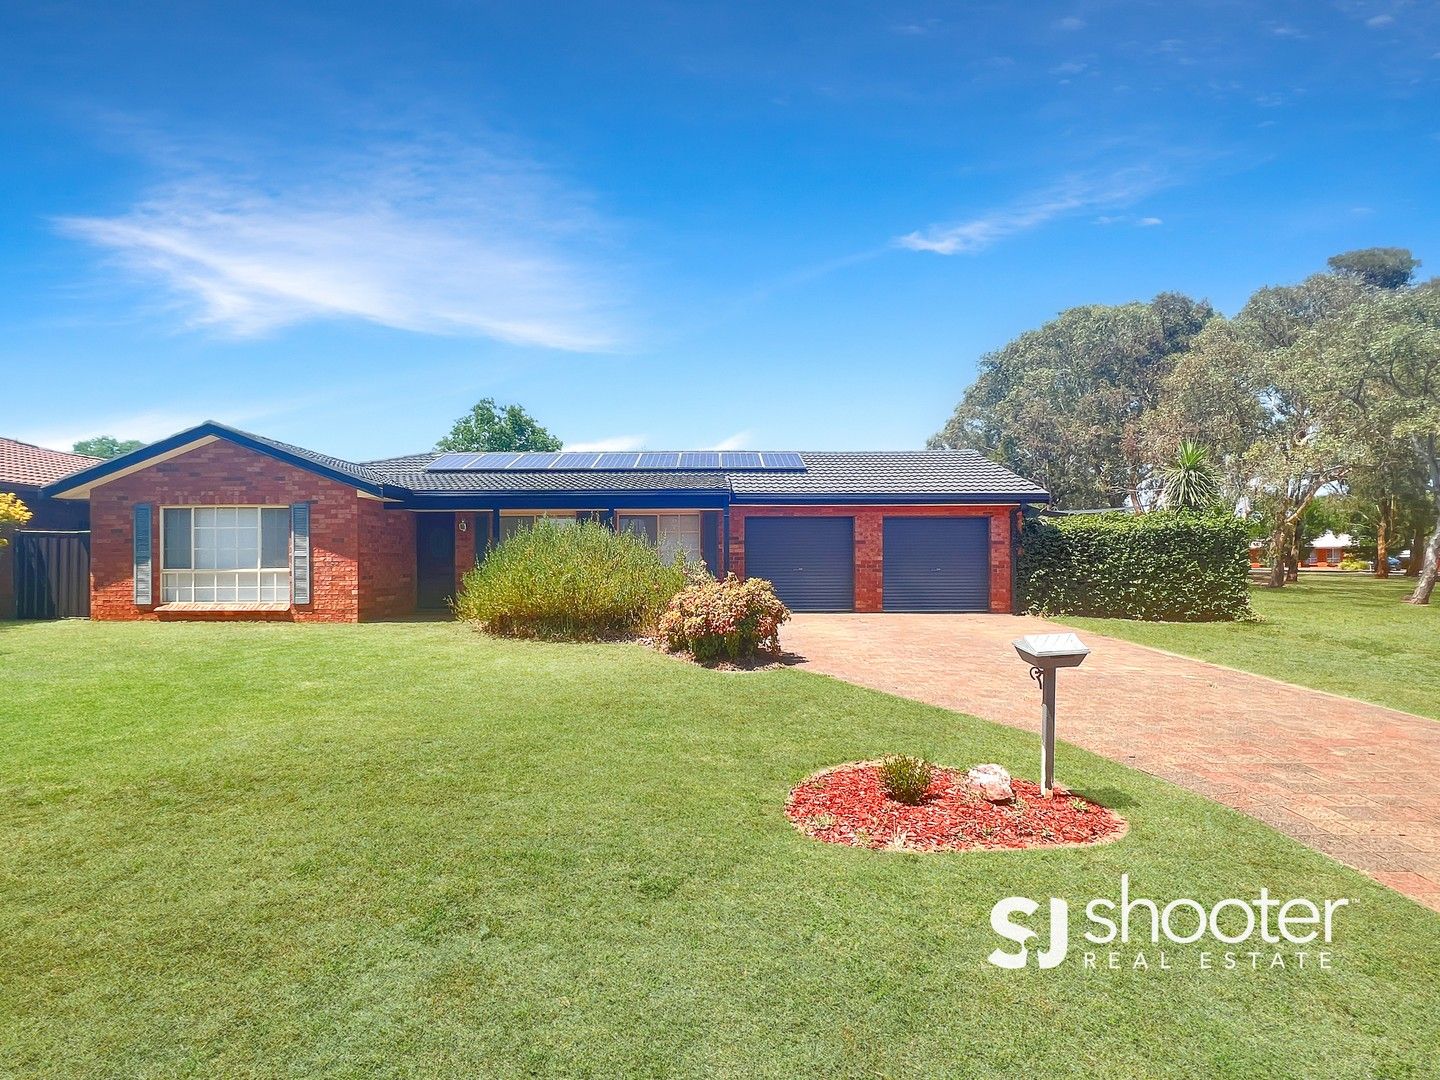 4 bedrooms House in 1 Sovereign Street DUBBO NSW, 2830